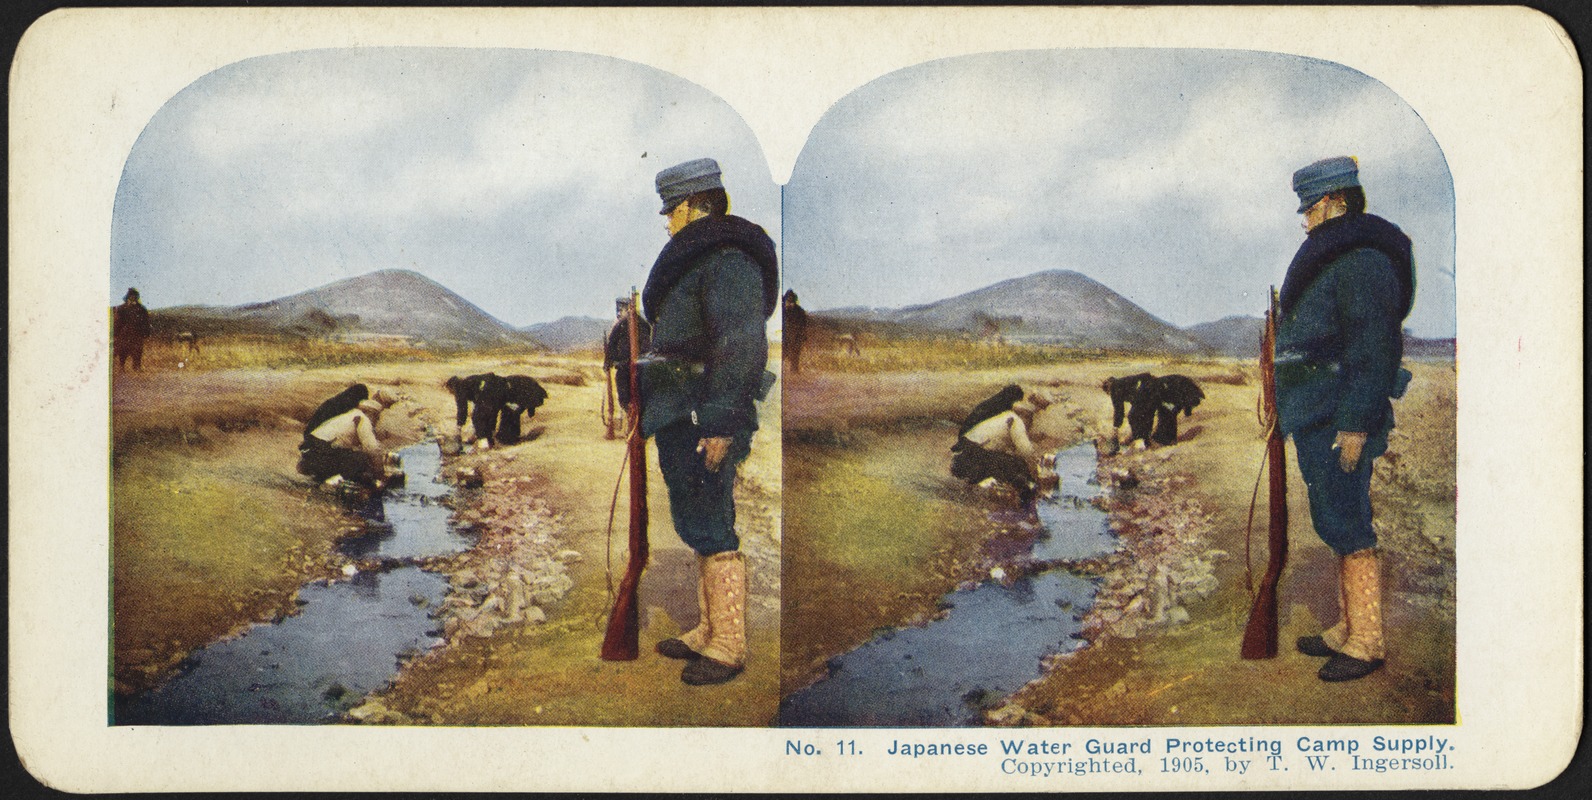 Japanese water guard protecting the camp's supply from contamination